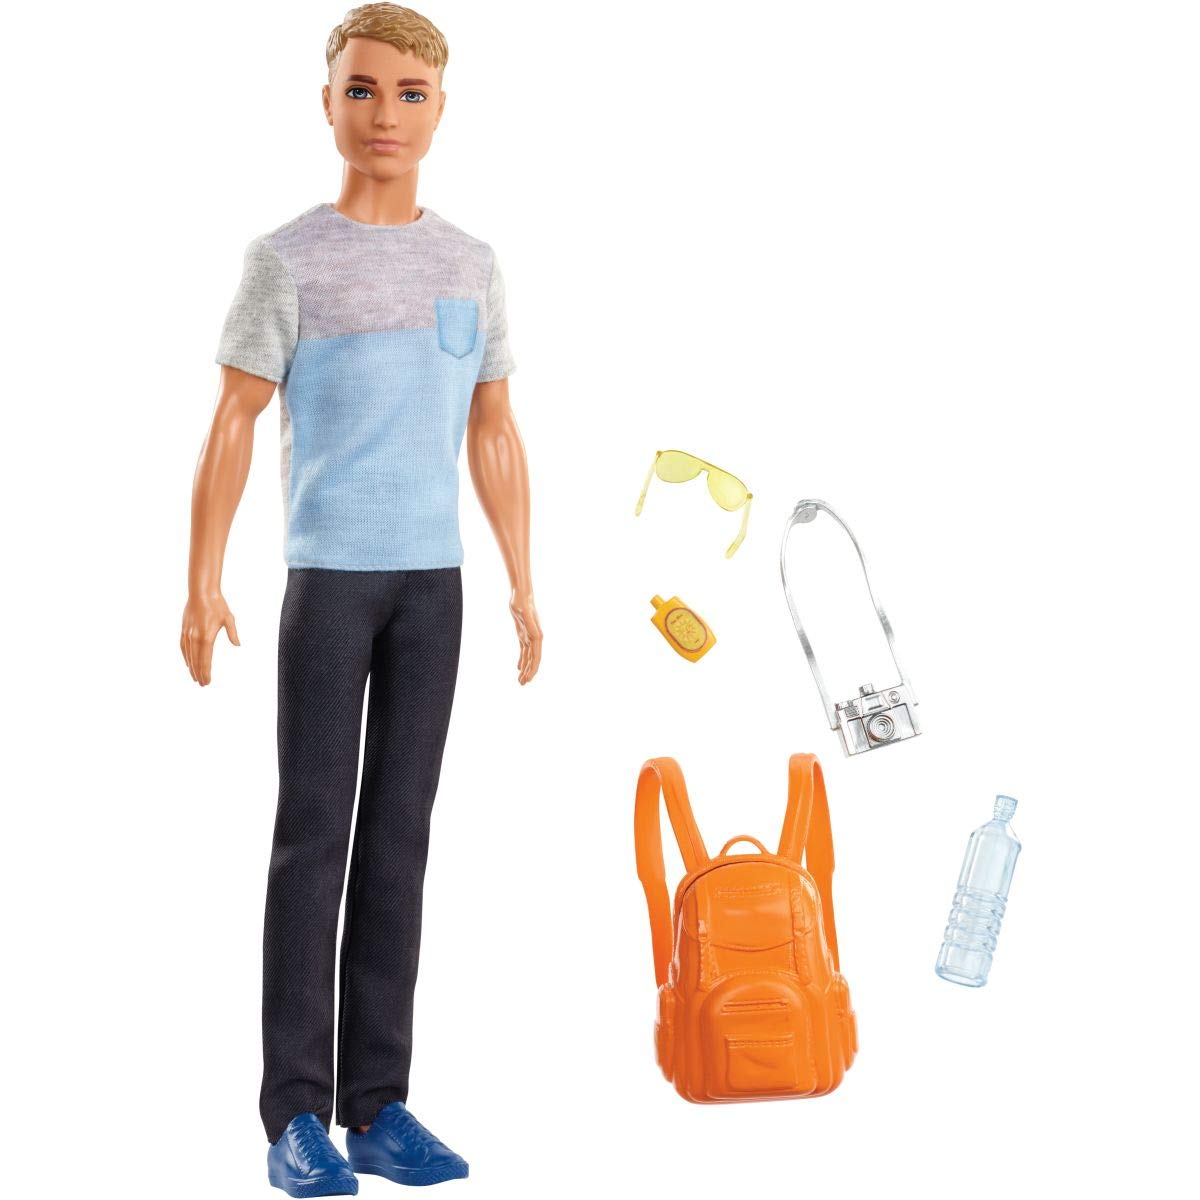 Barbie Travel Ken Doll, Dark Blonde, with 5 Accessories Including a Camera and Backpack, for 3 to 7 Year Olds